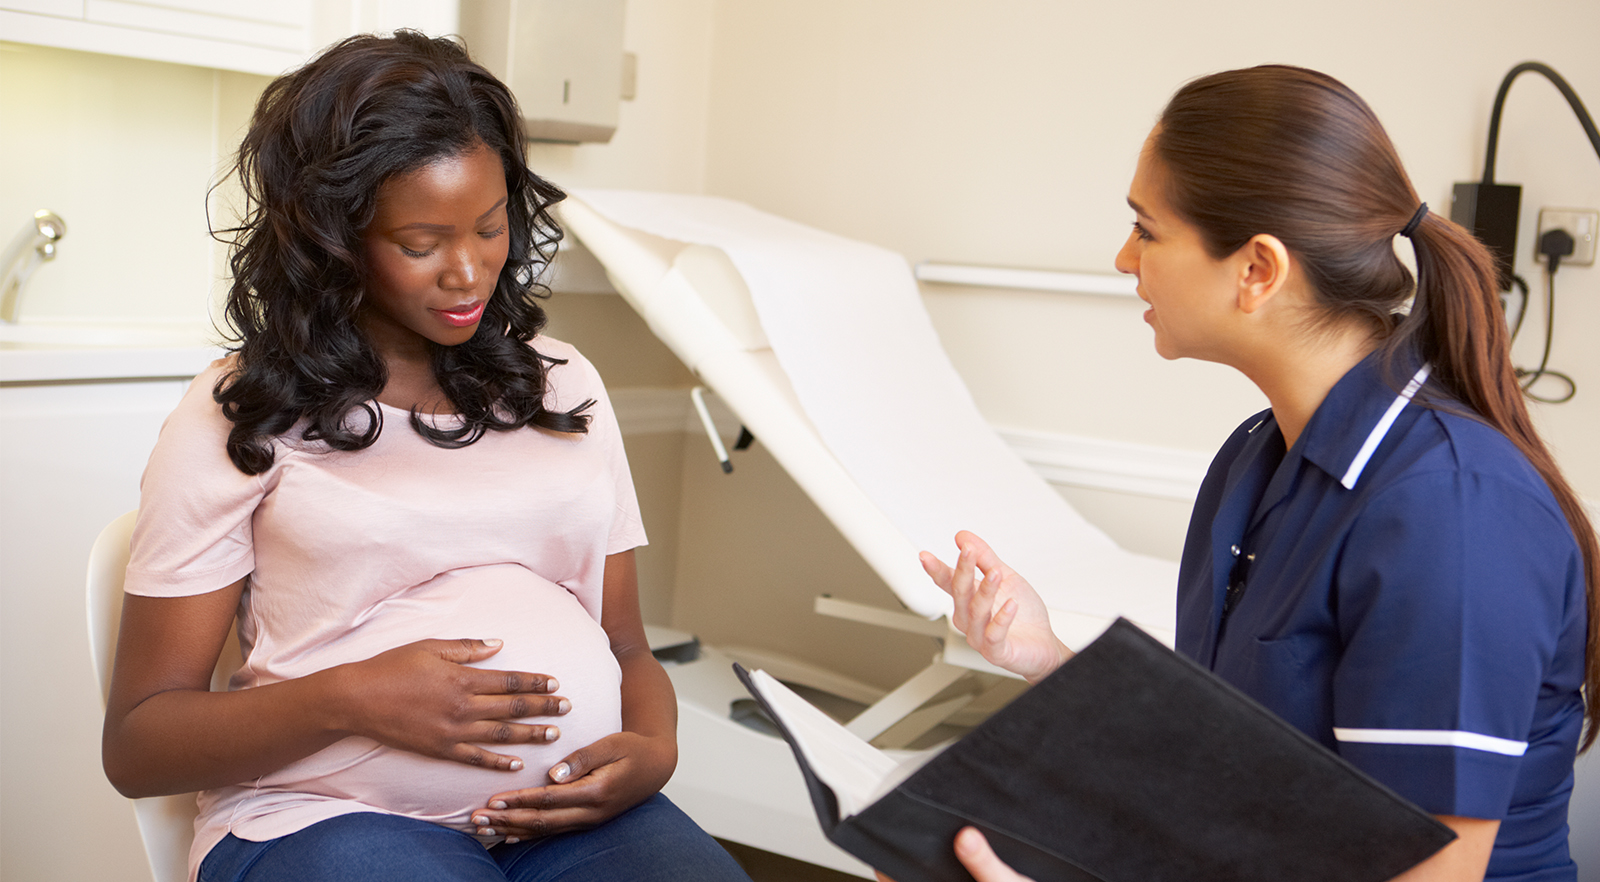 Image of a Pregnant Mother with her hands placed over the baby in her tummy in the doctors office talking to medical staff